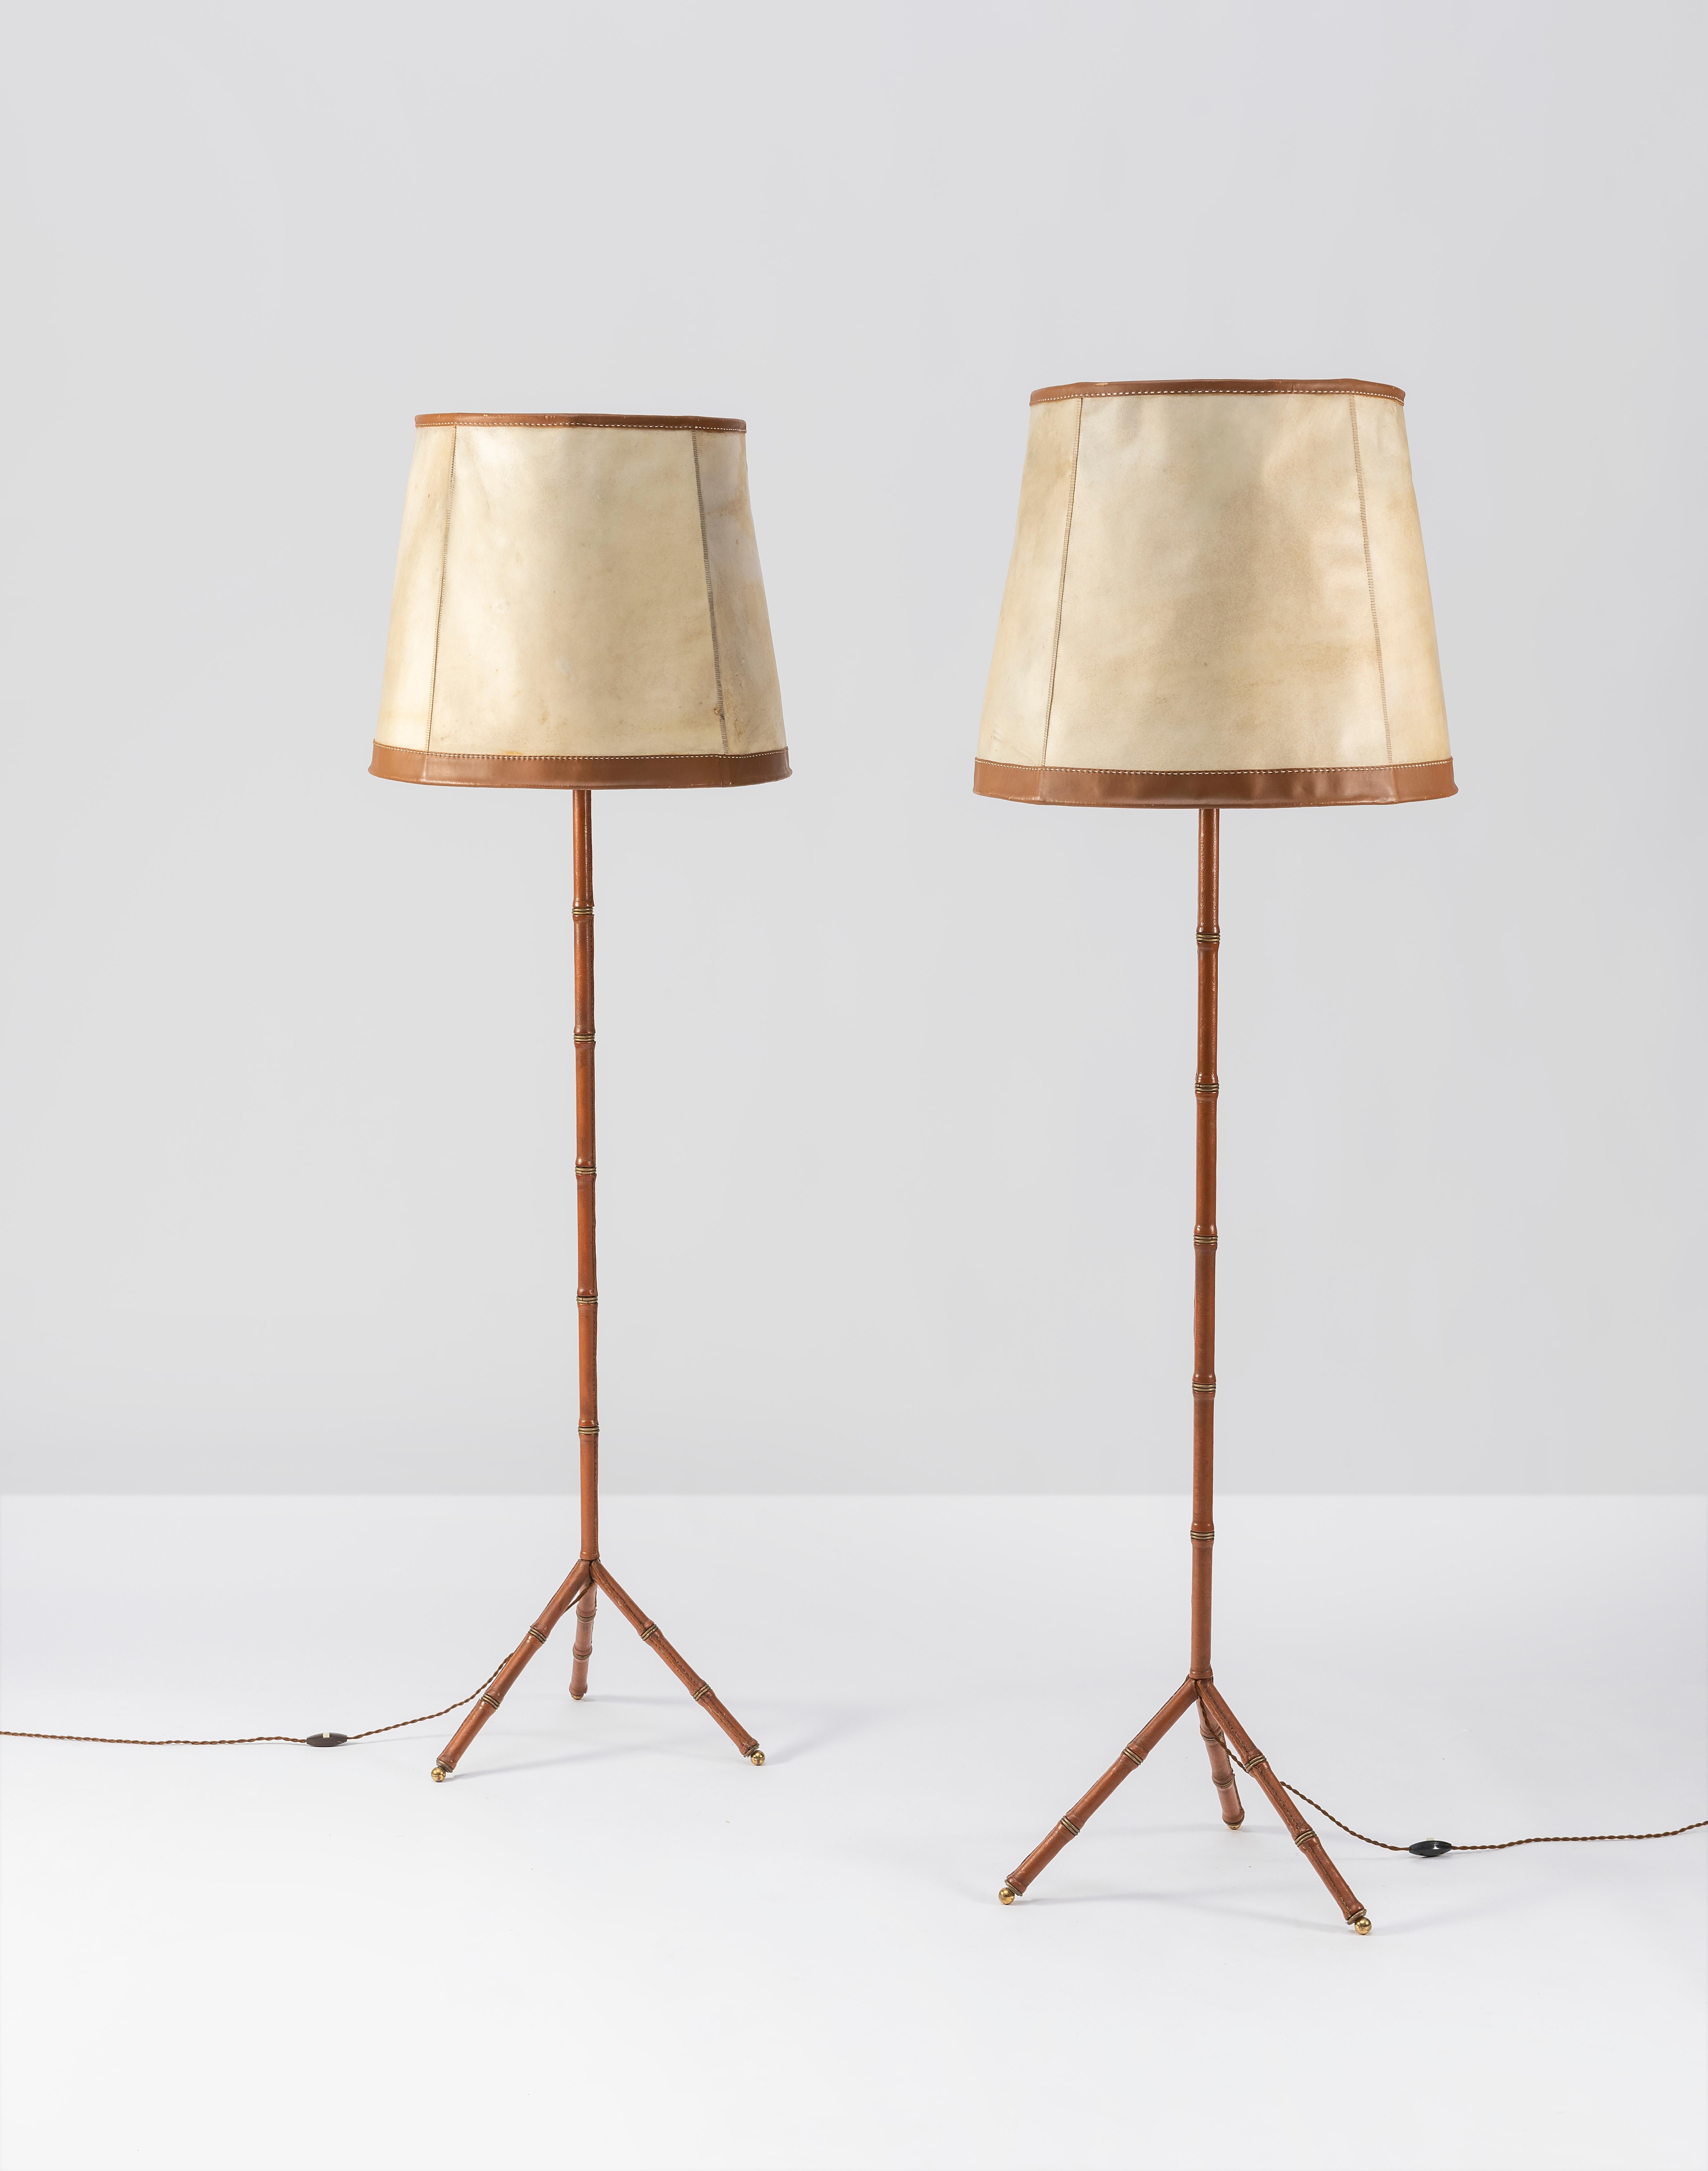 Rare pair of Jacques Adnet hand-stitched leather bamboo floor lamps with original leather and parchment shades. 

Leather with beautiful age-appropriate patina. 

Some dimpling to parchment on shades.